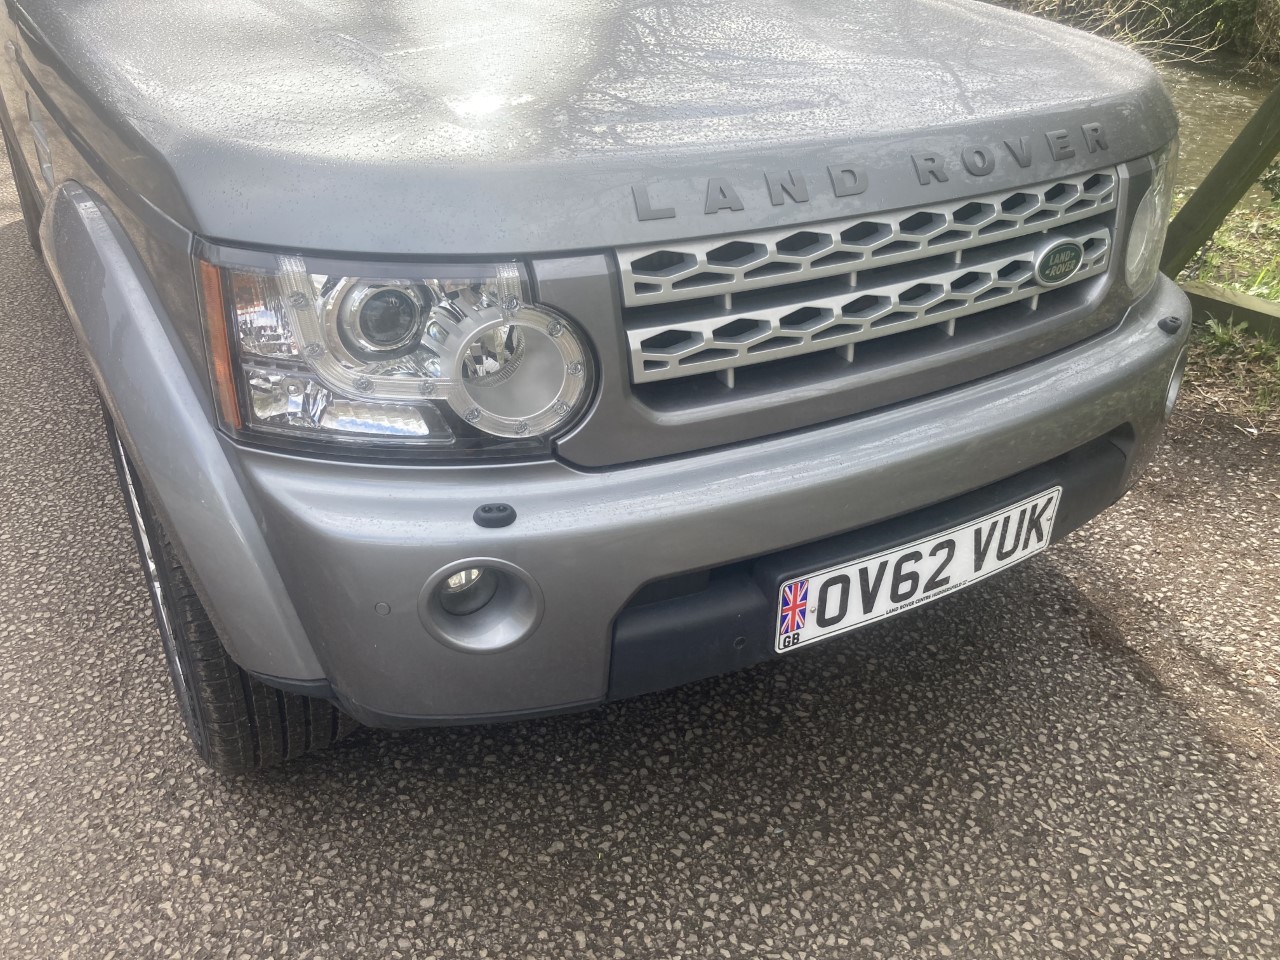 OV62 VUK – 2012 Discovery 4 – Diesel Automatic HSE – Low mileage | Land ...